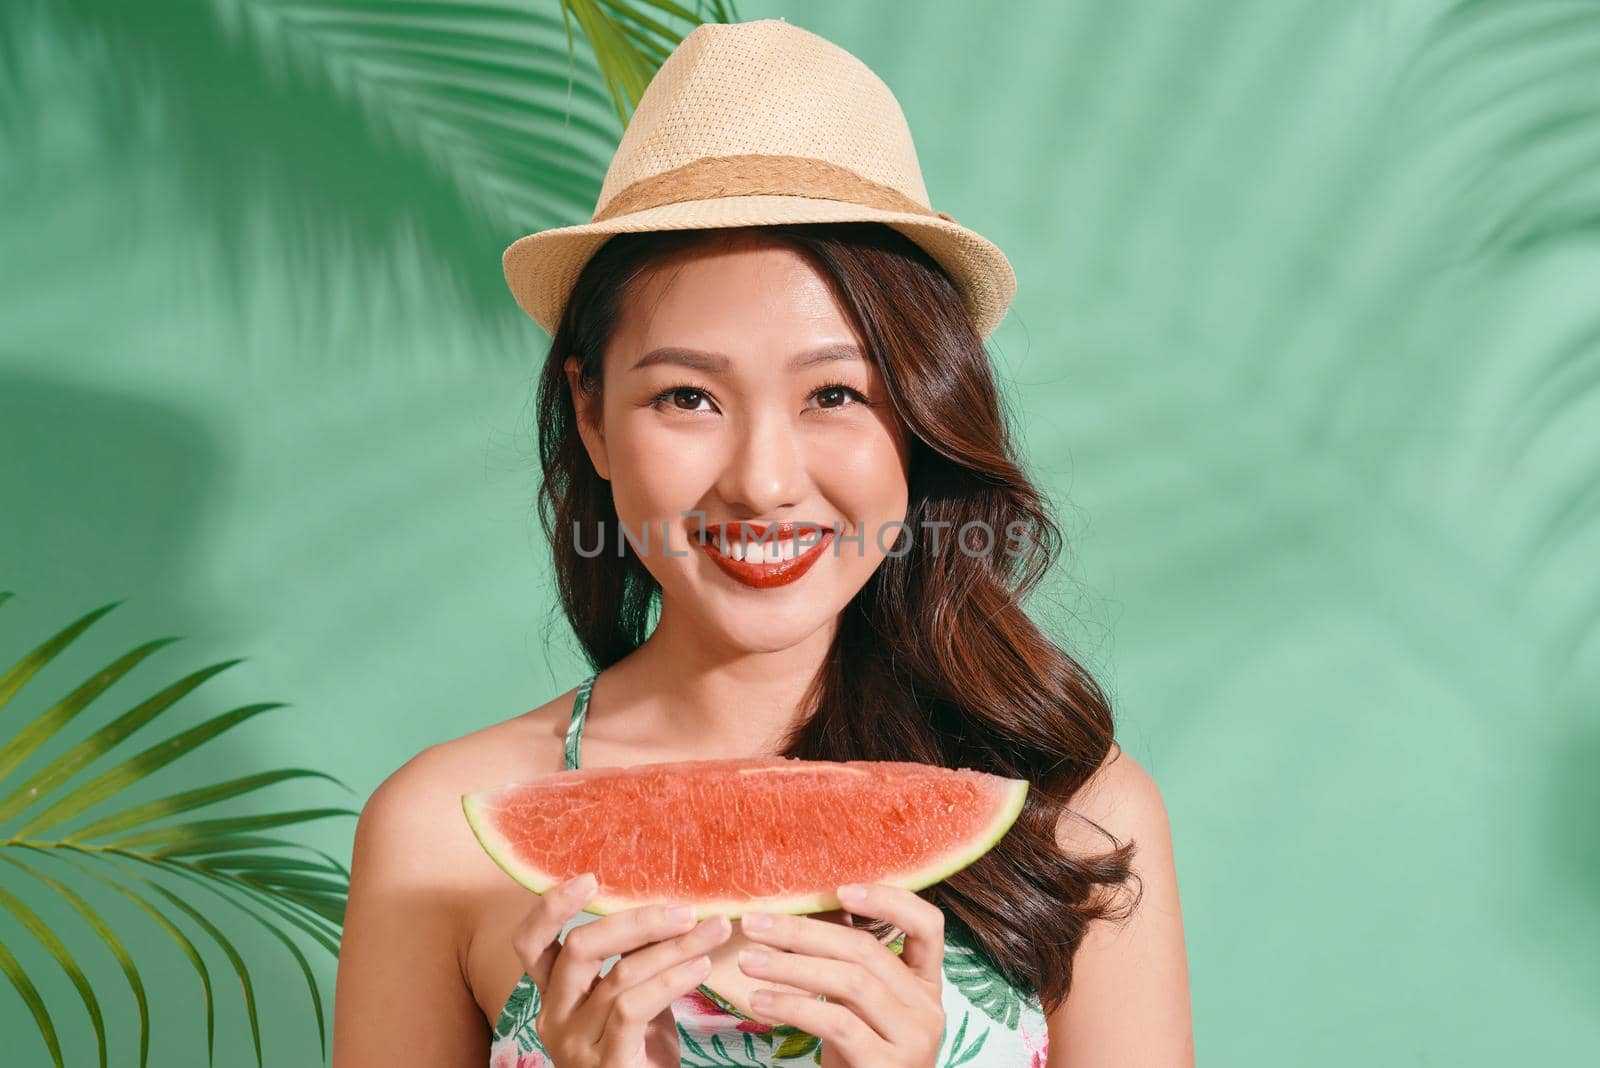 Slice of summer goodness. Beautiful young woman holding slice of watermelon and smiling while standing on blue background by makidotvn